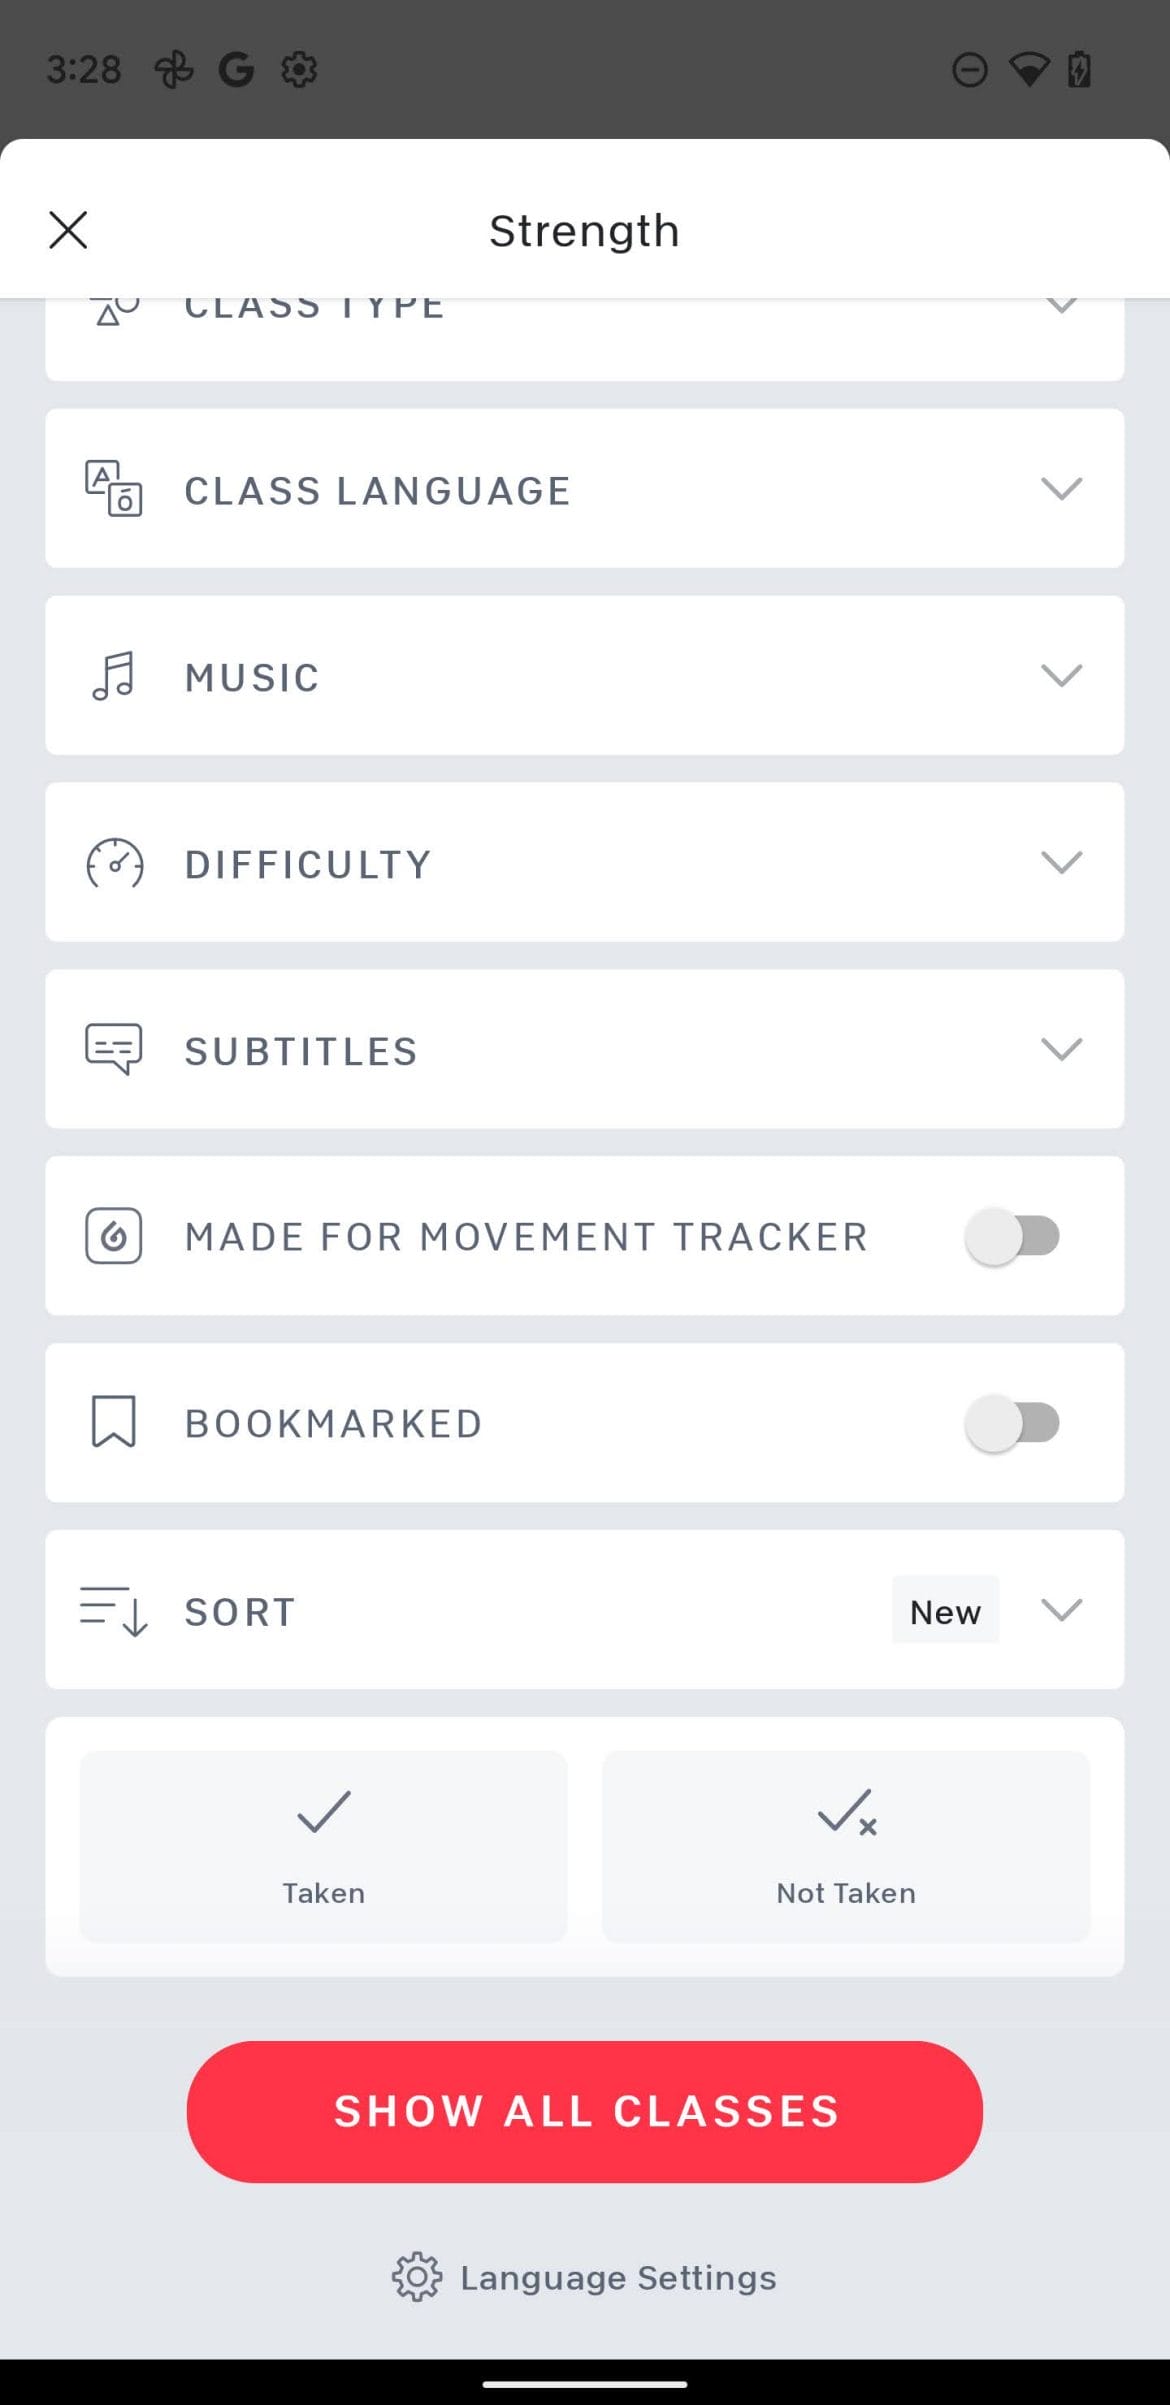 Peloton Android App filtering options that show new "Made for Movement Tracker" filter.